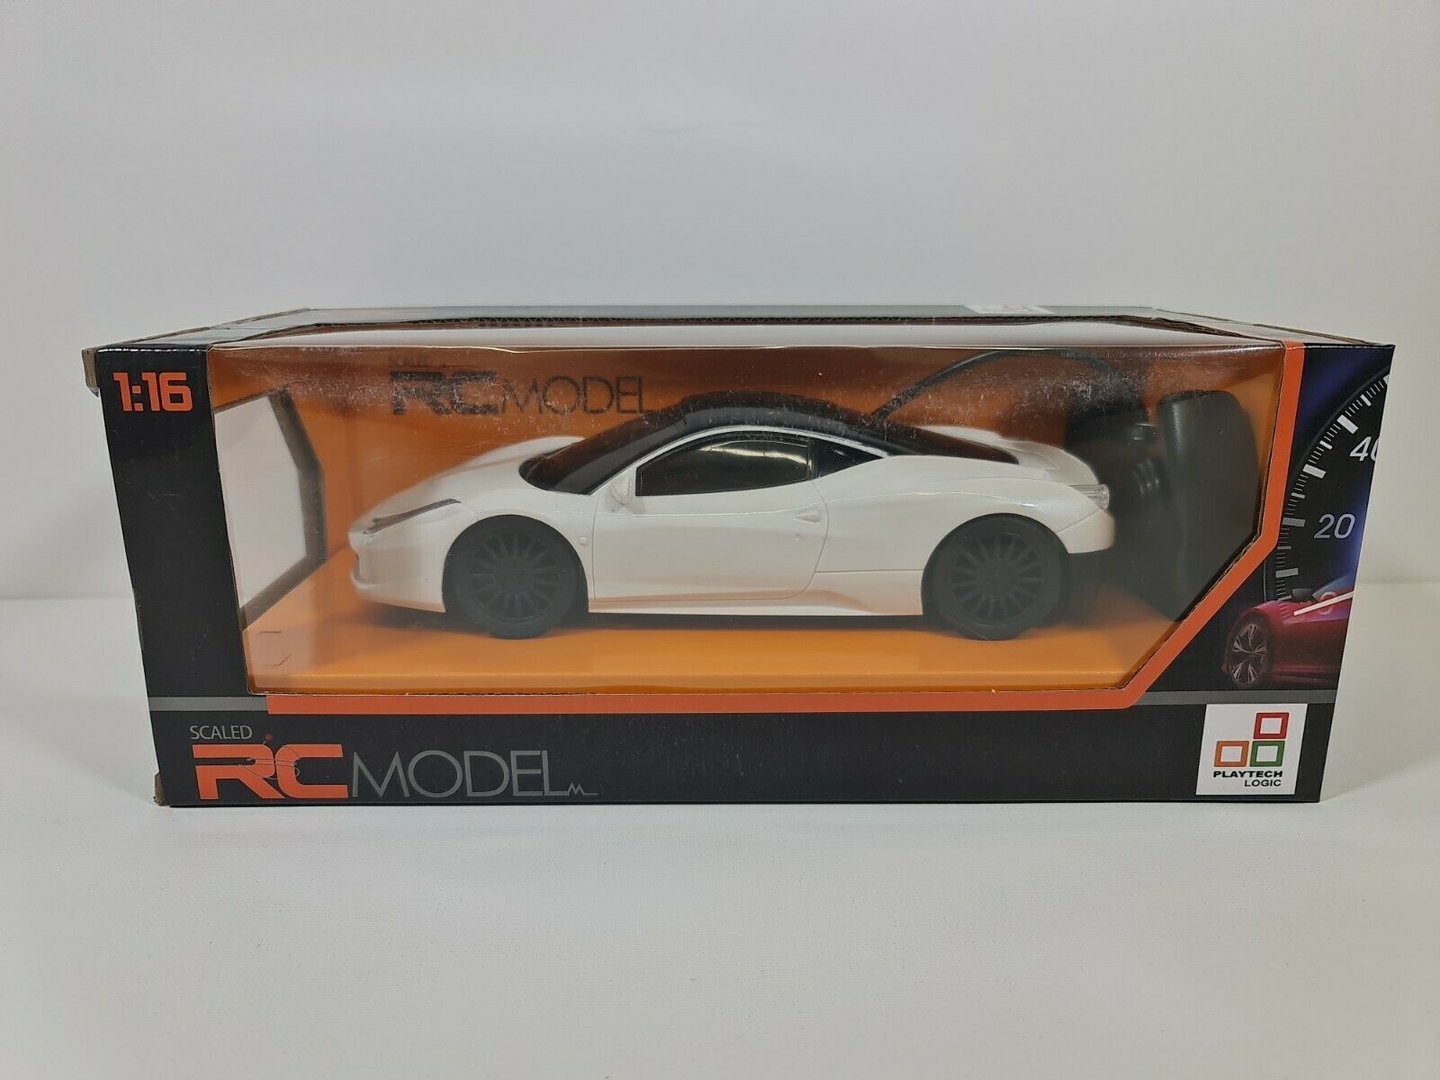 Playtech Logic 1:16 Scaled White Ferrari 458 RC Car RRP £12.99 CLEARANCE XL £7.50 or 2 for £14